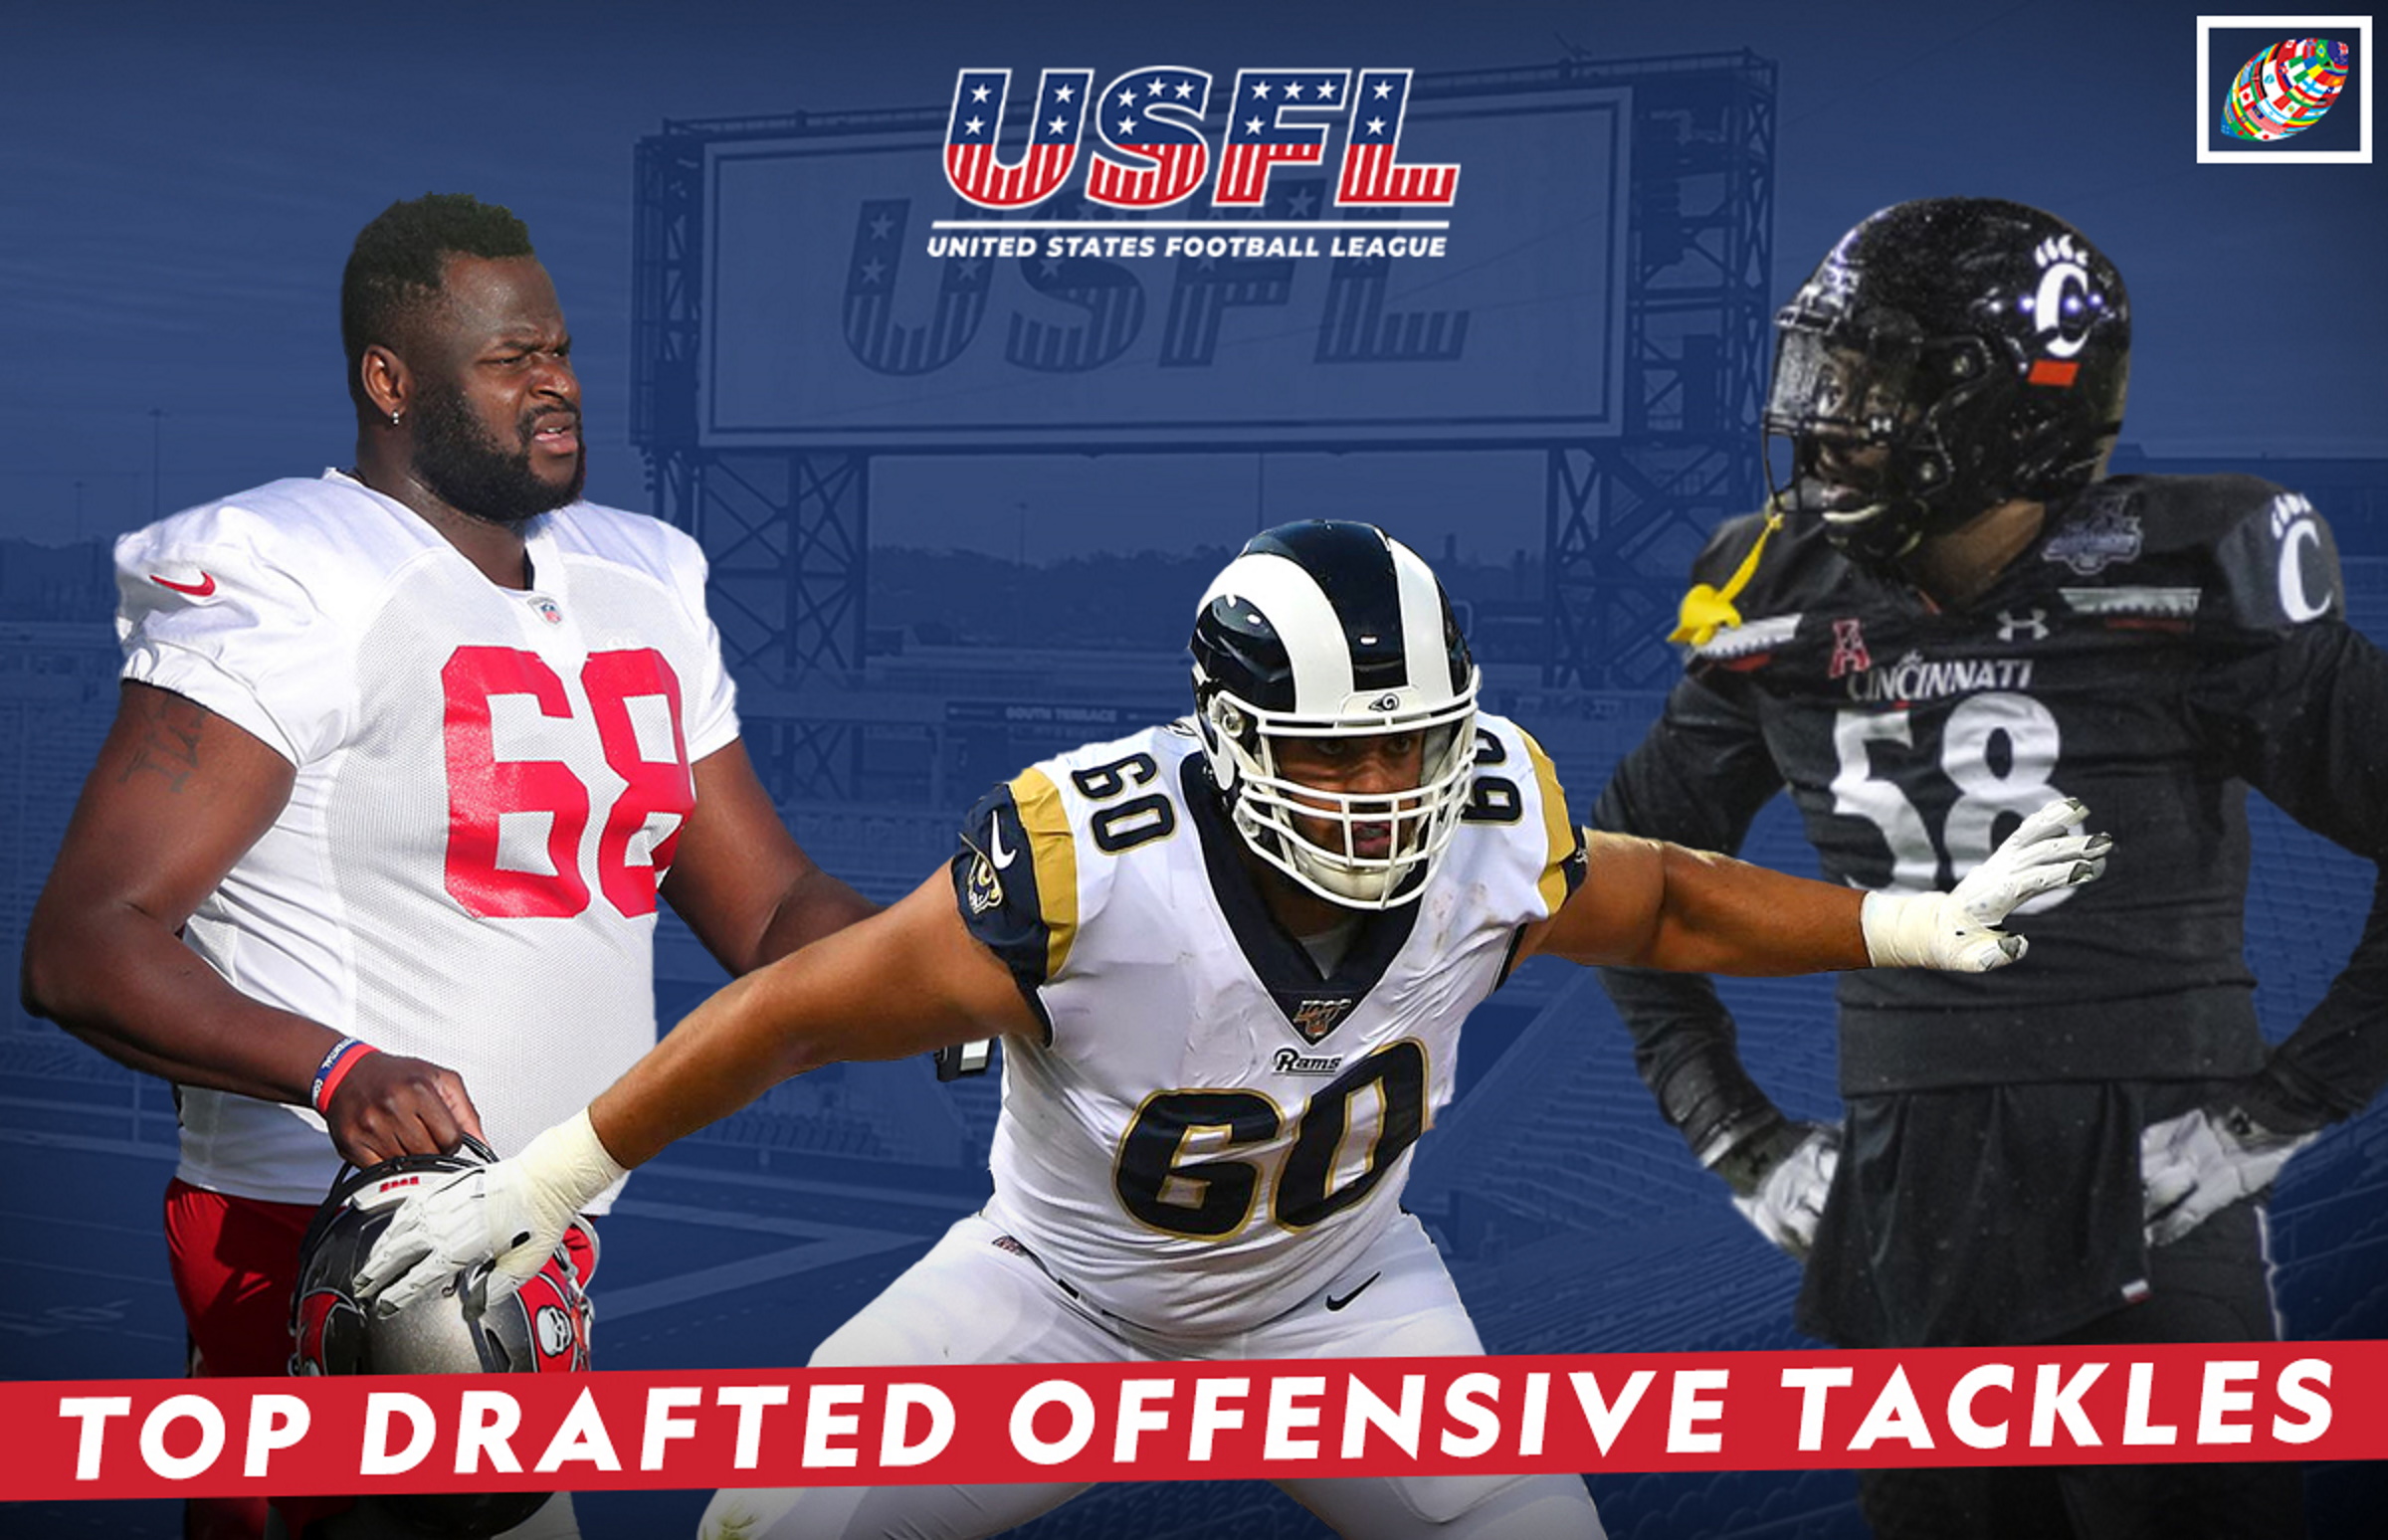 Top offensive tackles picked in USFL Draft